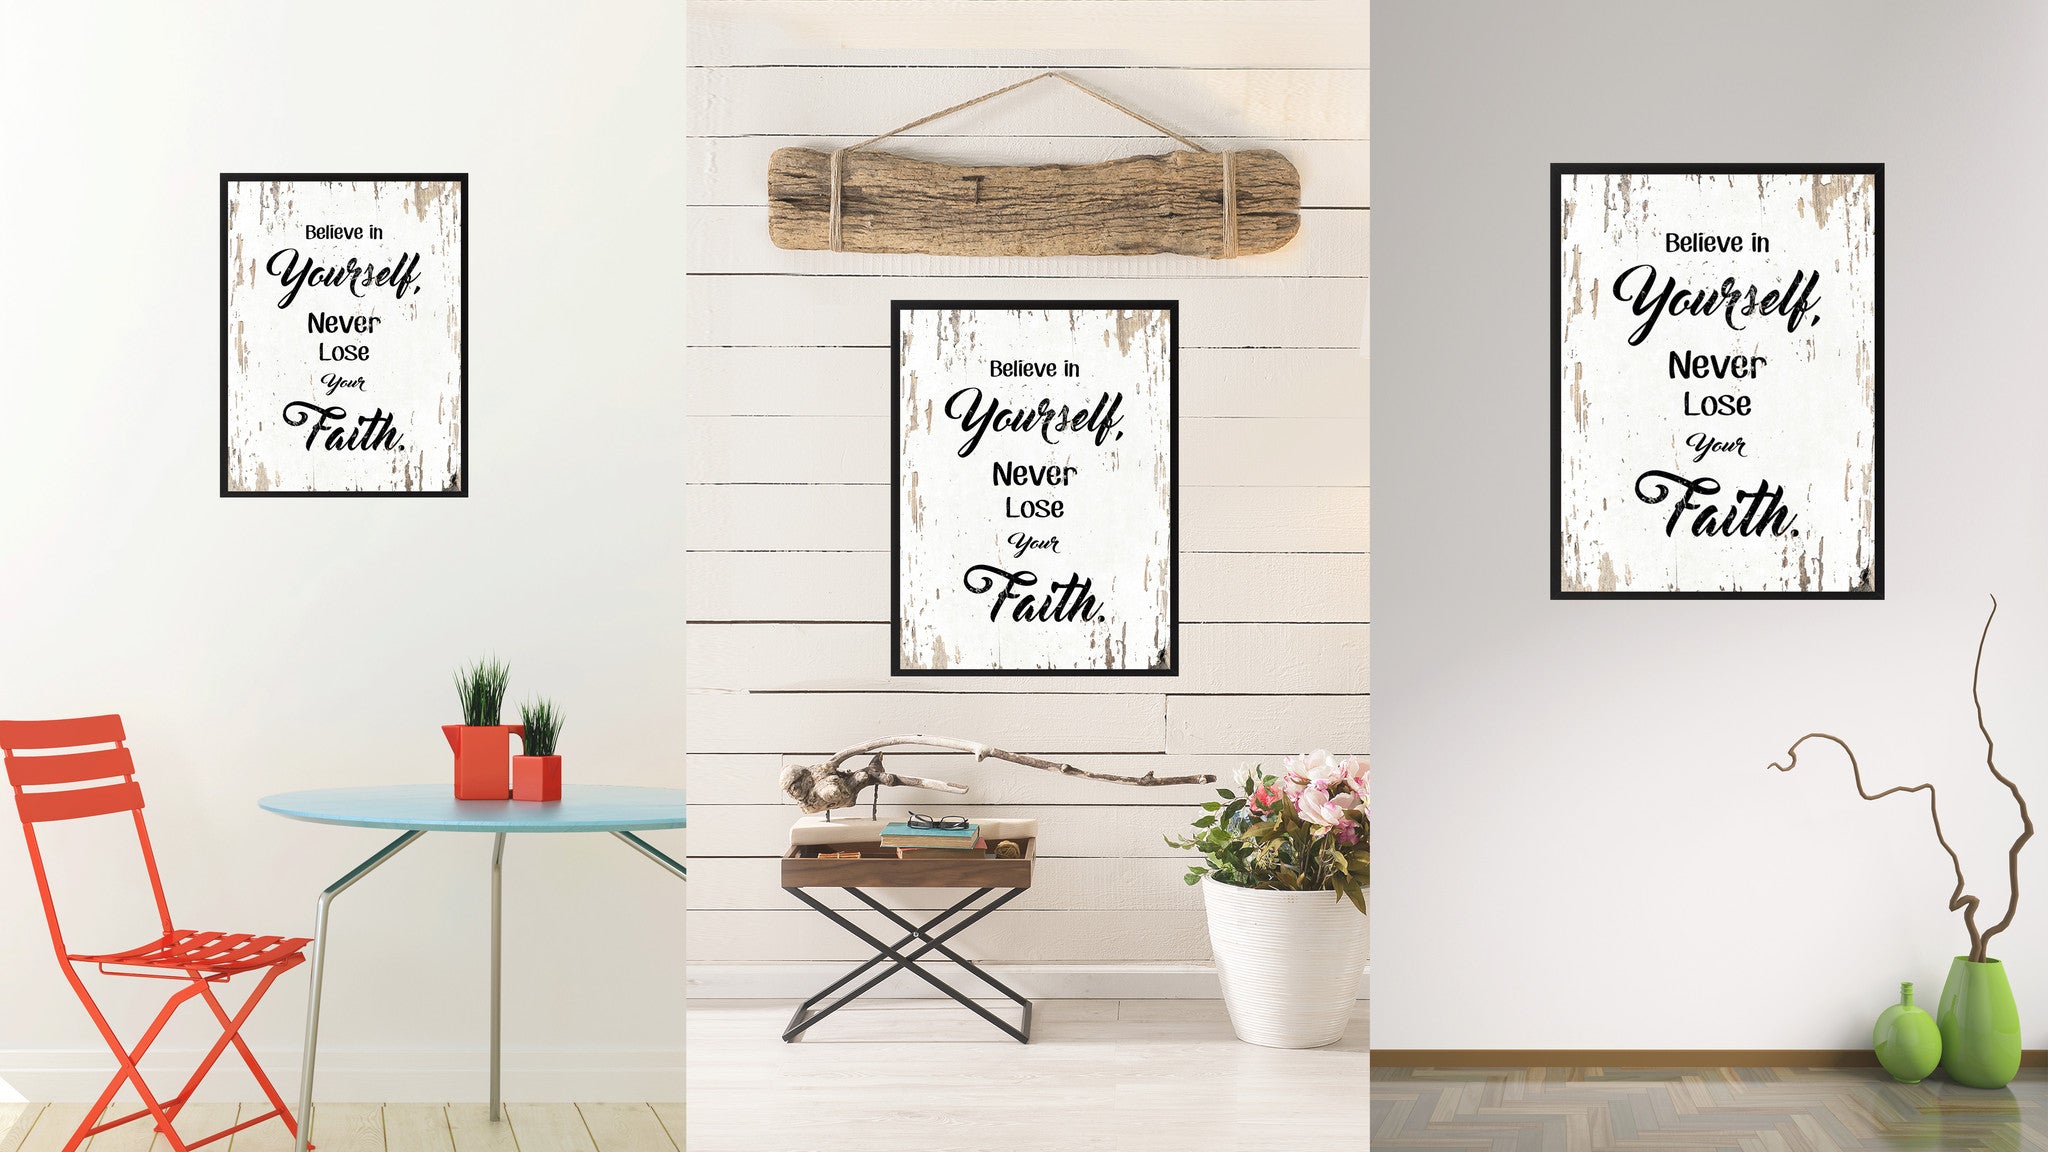 Believe in yourself never lose your faith Inspirational Quote Saying Gift Ideas Home Decor Wall Art